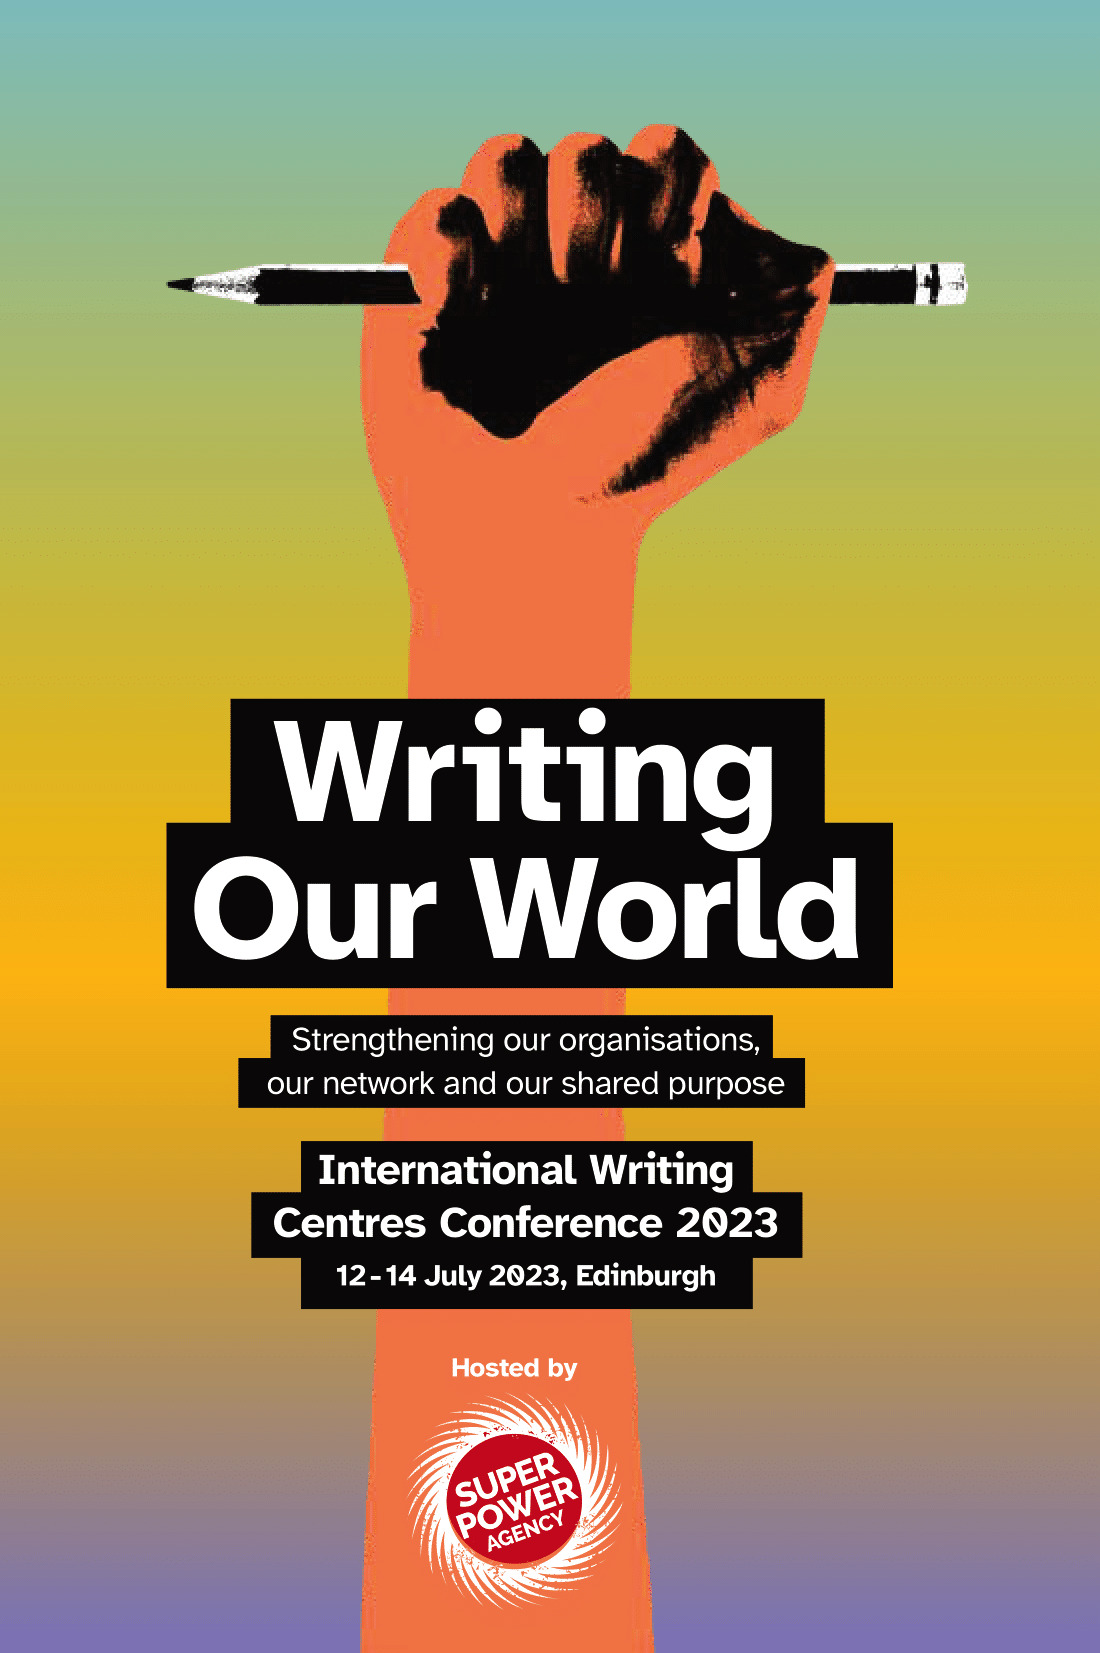 Poster that says Writing Our World